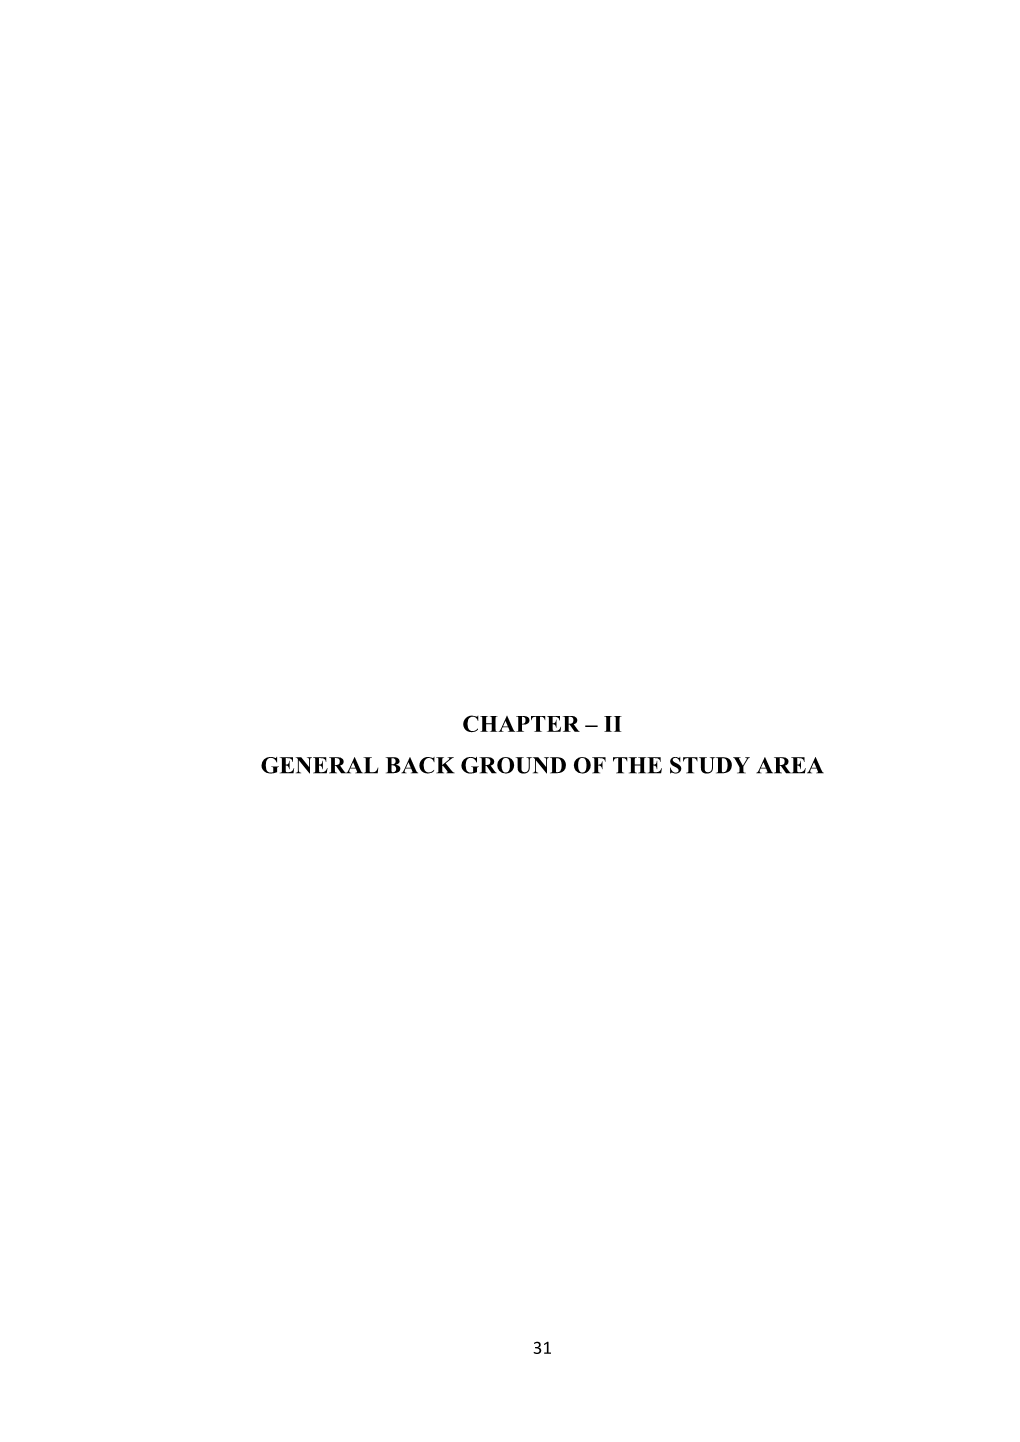 Chapter – Ii General Back Ground of the Study Area